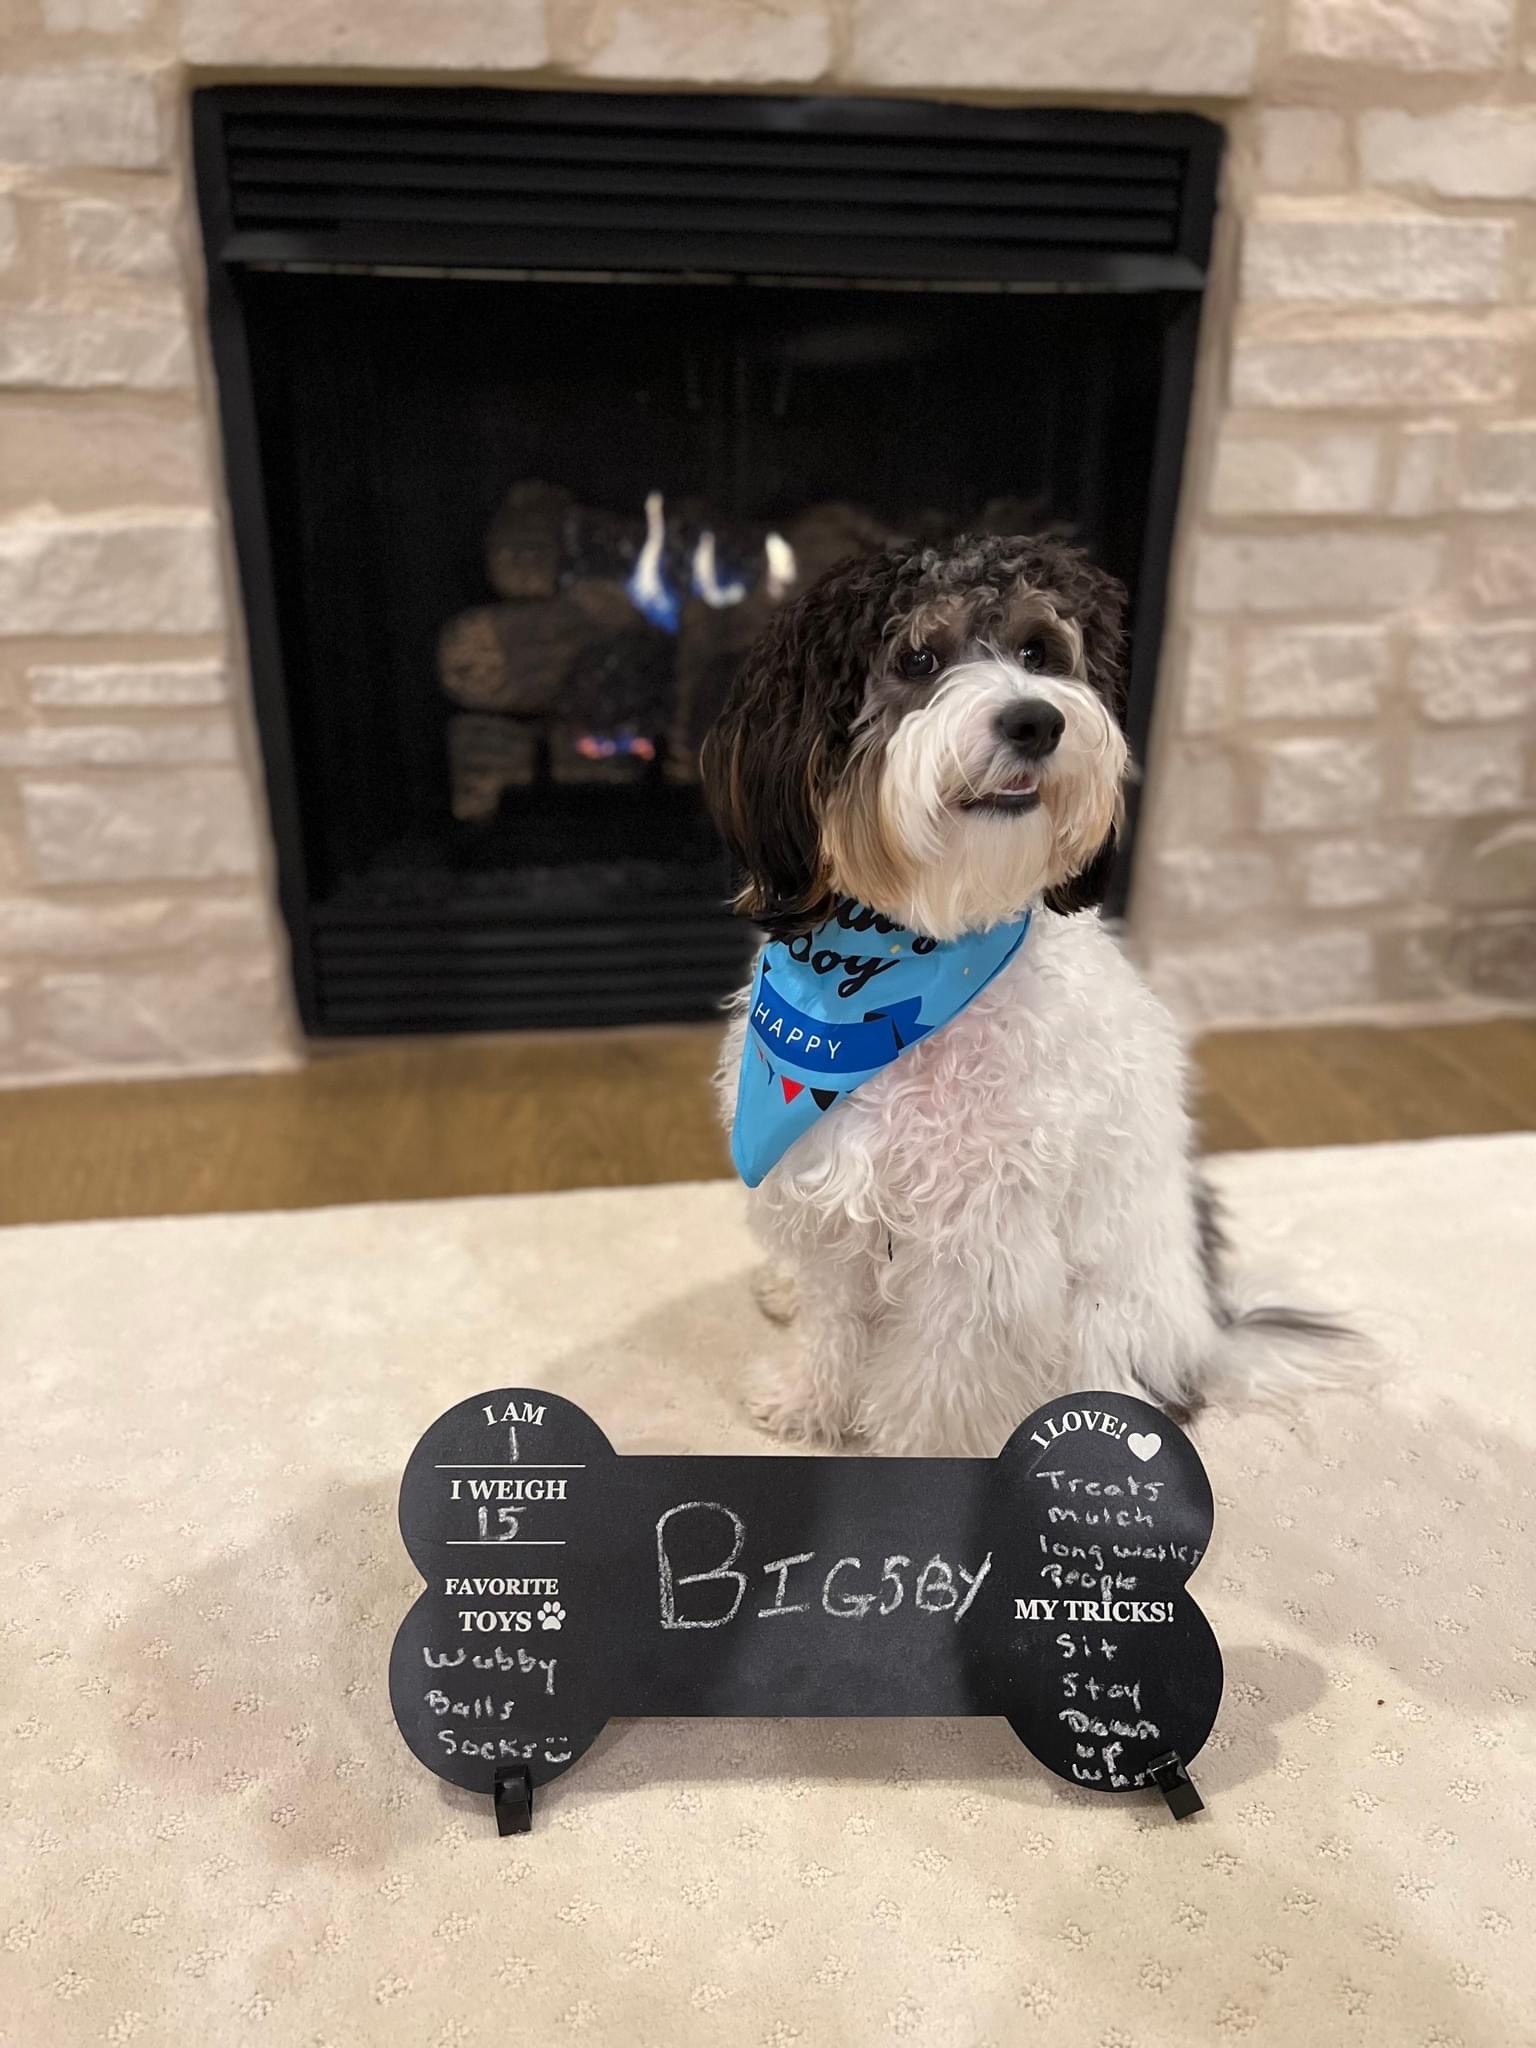 Puppy sitting in front of a fireplace